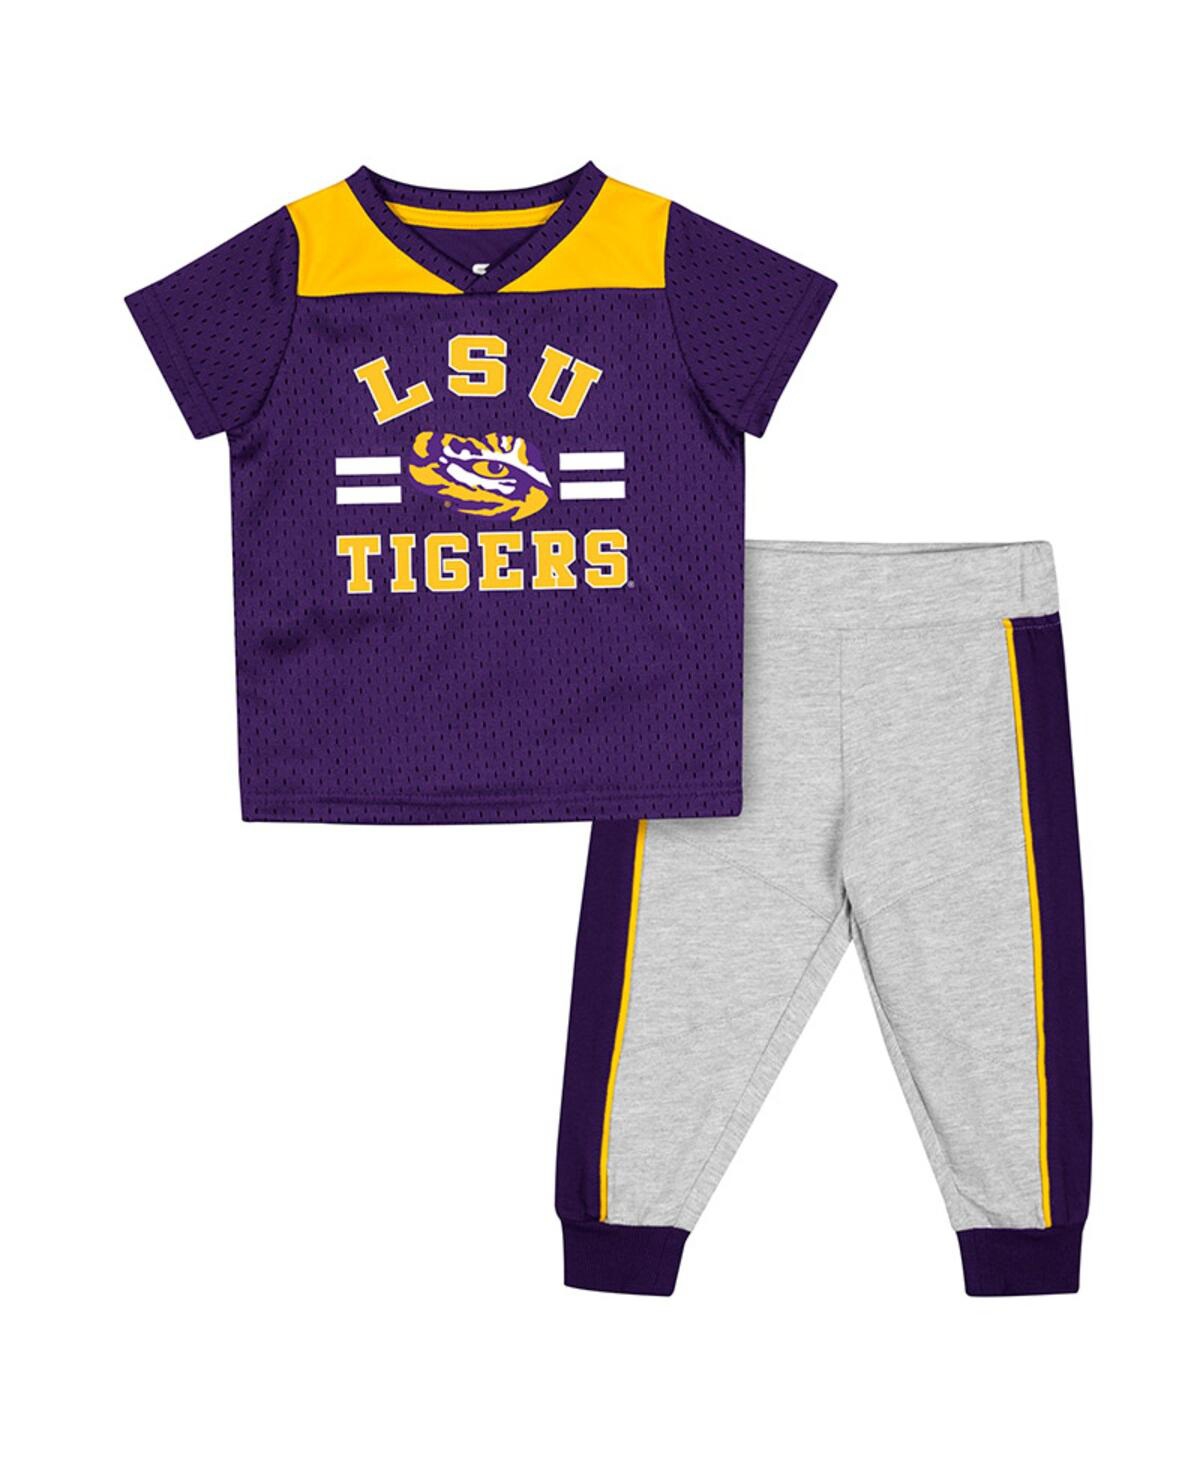 COLOSSEUM INFANT BOYS AND GIRLS COLOSSEUM PURPLE, HEATHER GRAY LSU TIGERS KA-BOOT-IT JERSEY AND PANTS SET